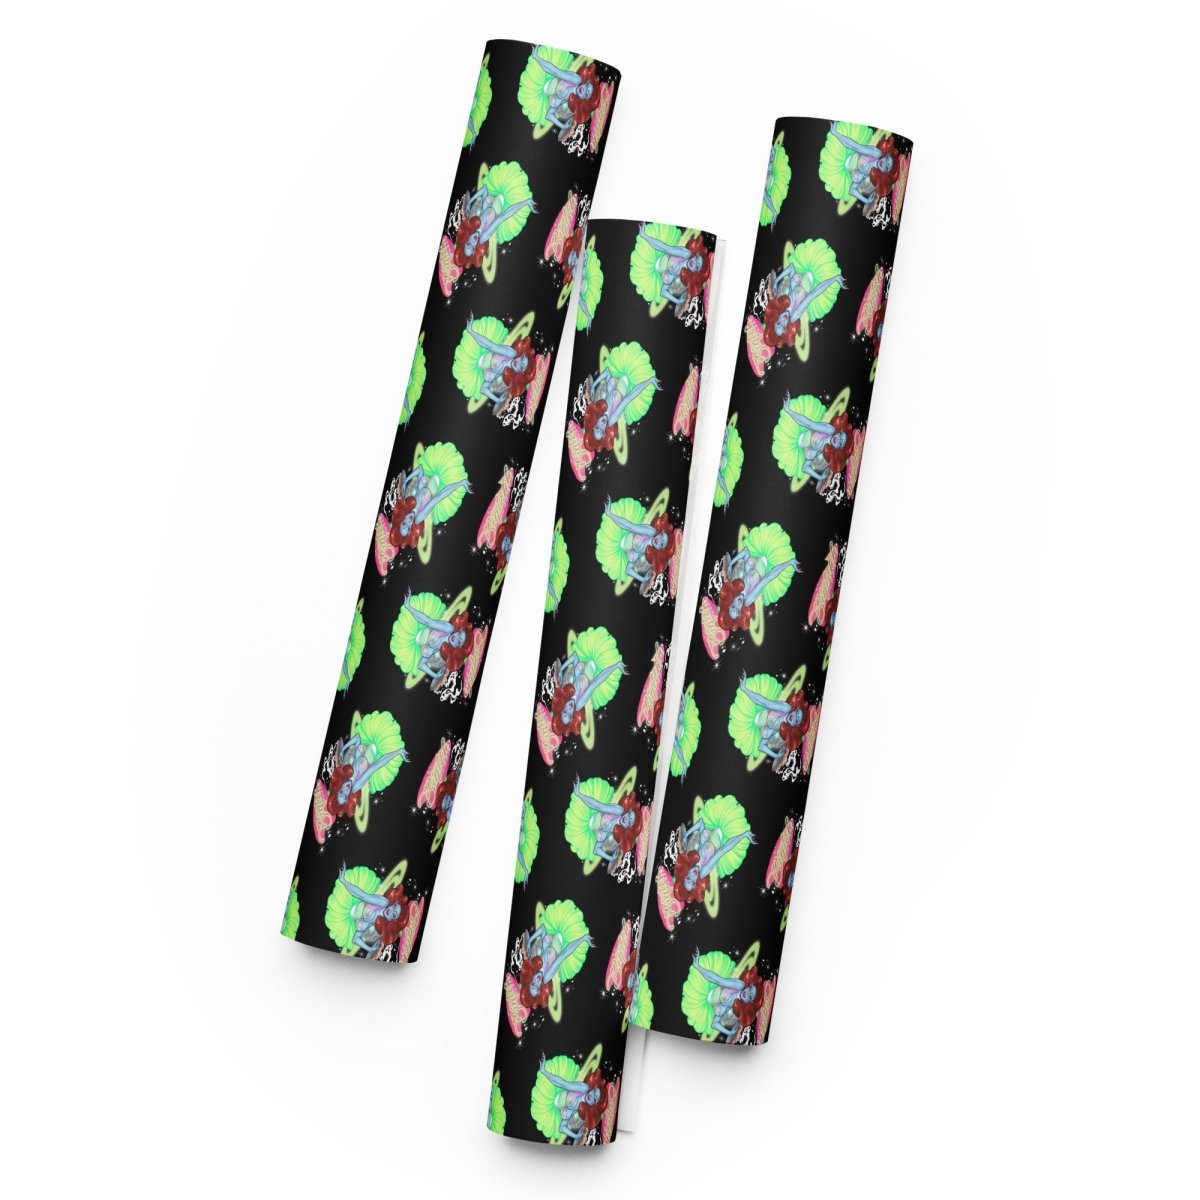 Biqtch Puddin - Alien Wrapping paper sheets - dragqueenmerch